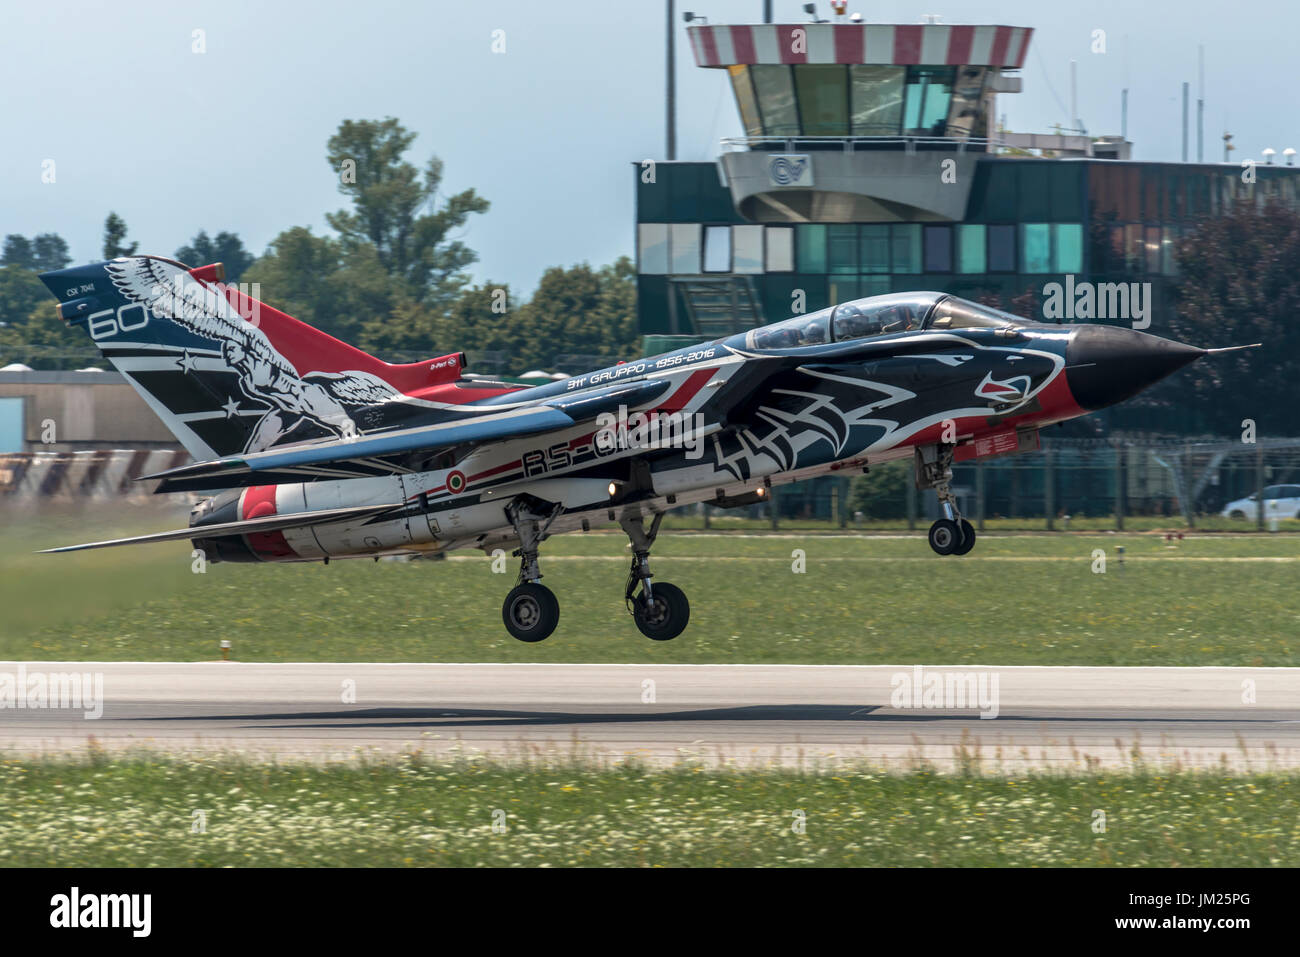 Panavia Tornado PA-2000 took off from Turin to Fairford for The Royal International Air Tattoo in United Kingdom. Winner for Tornado with best livery. Stock Photo